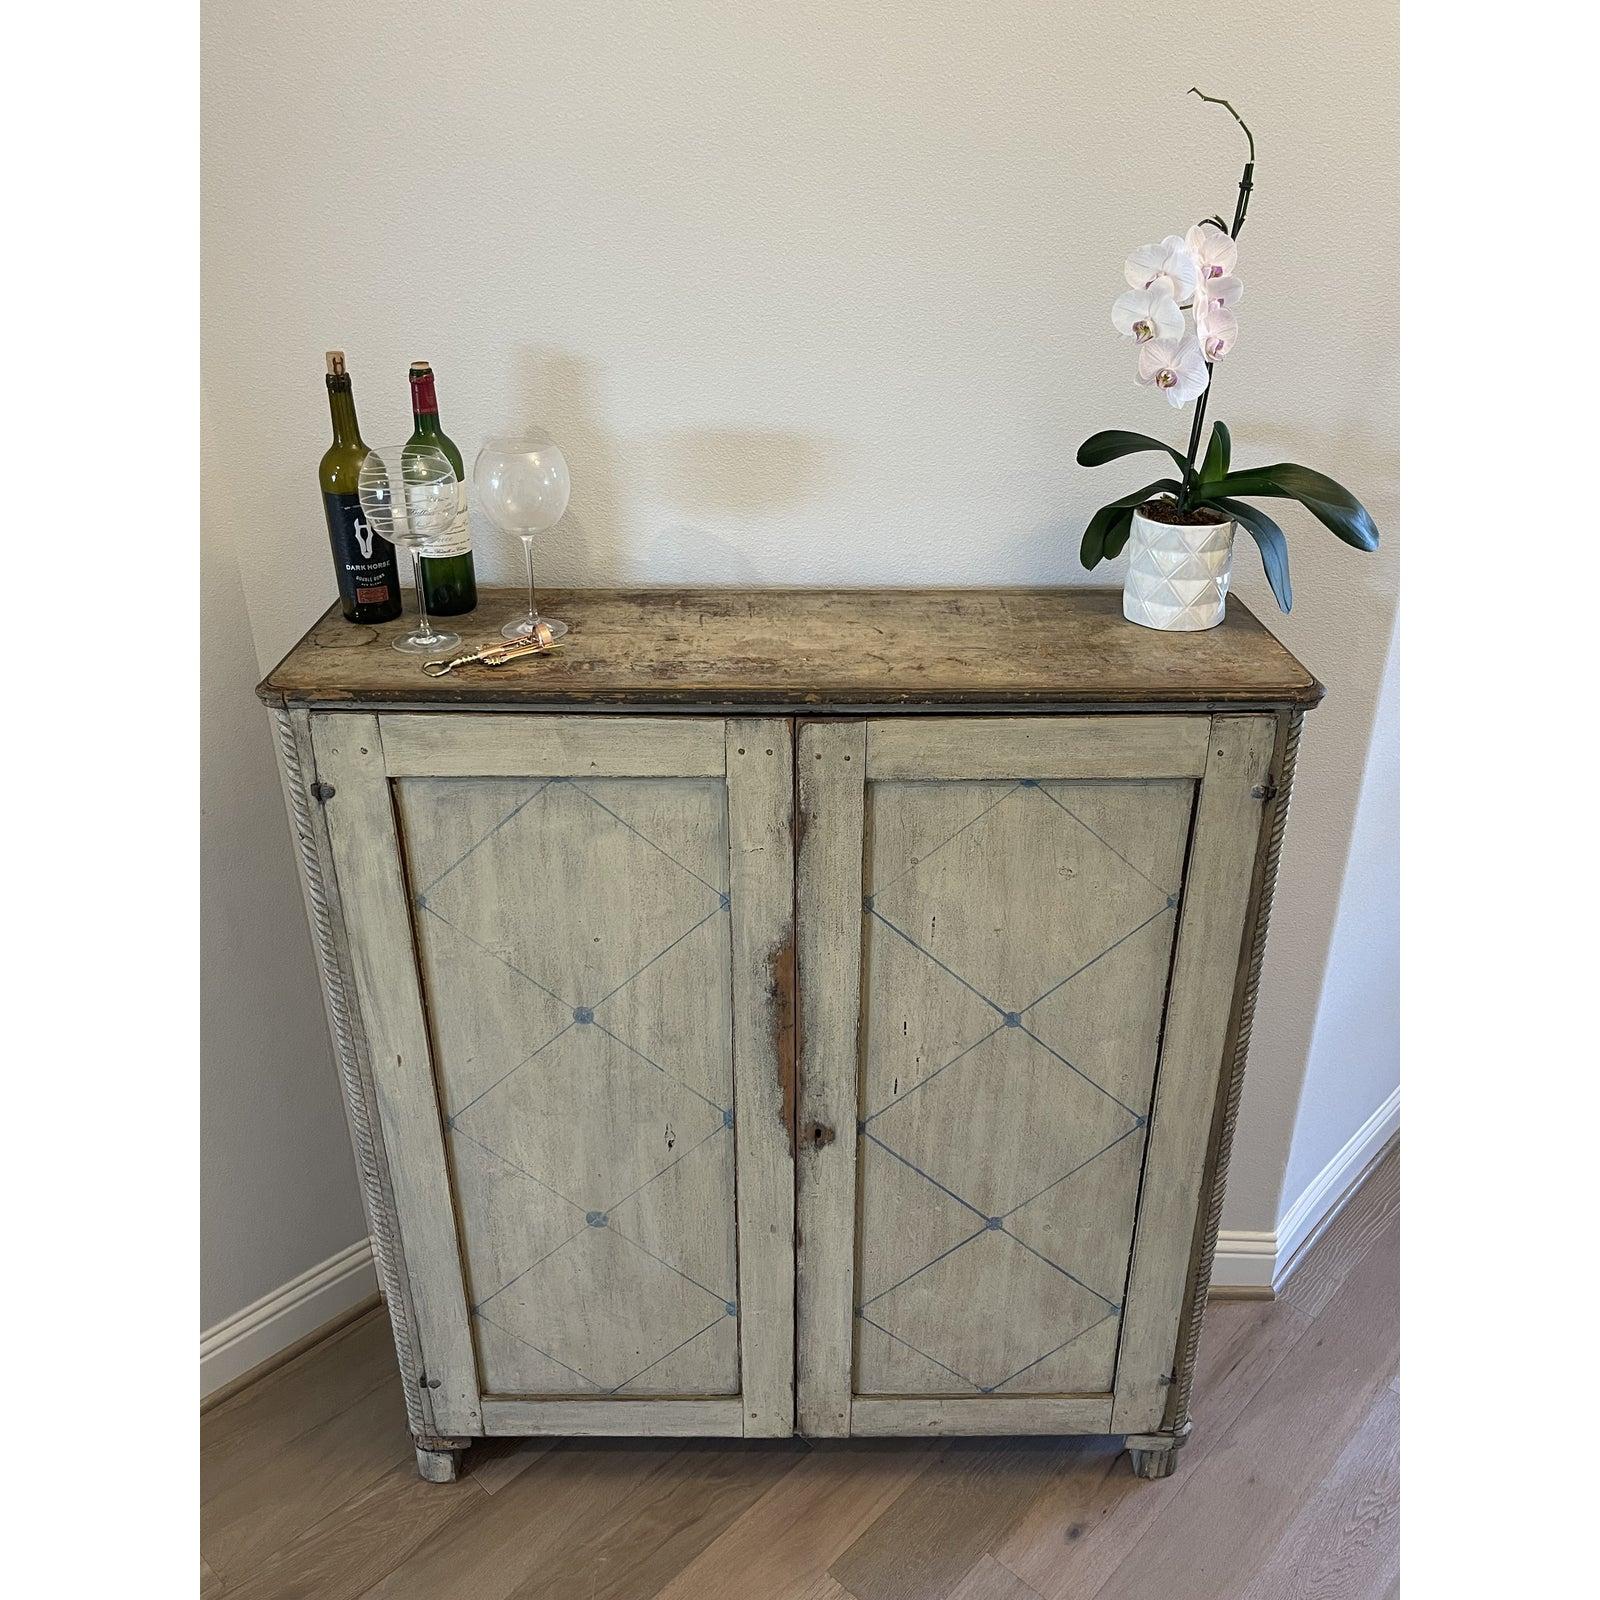 18th/19th Century Swedish Gustavian Period Painted Pine Kitchen Cupboard For Sale 5